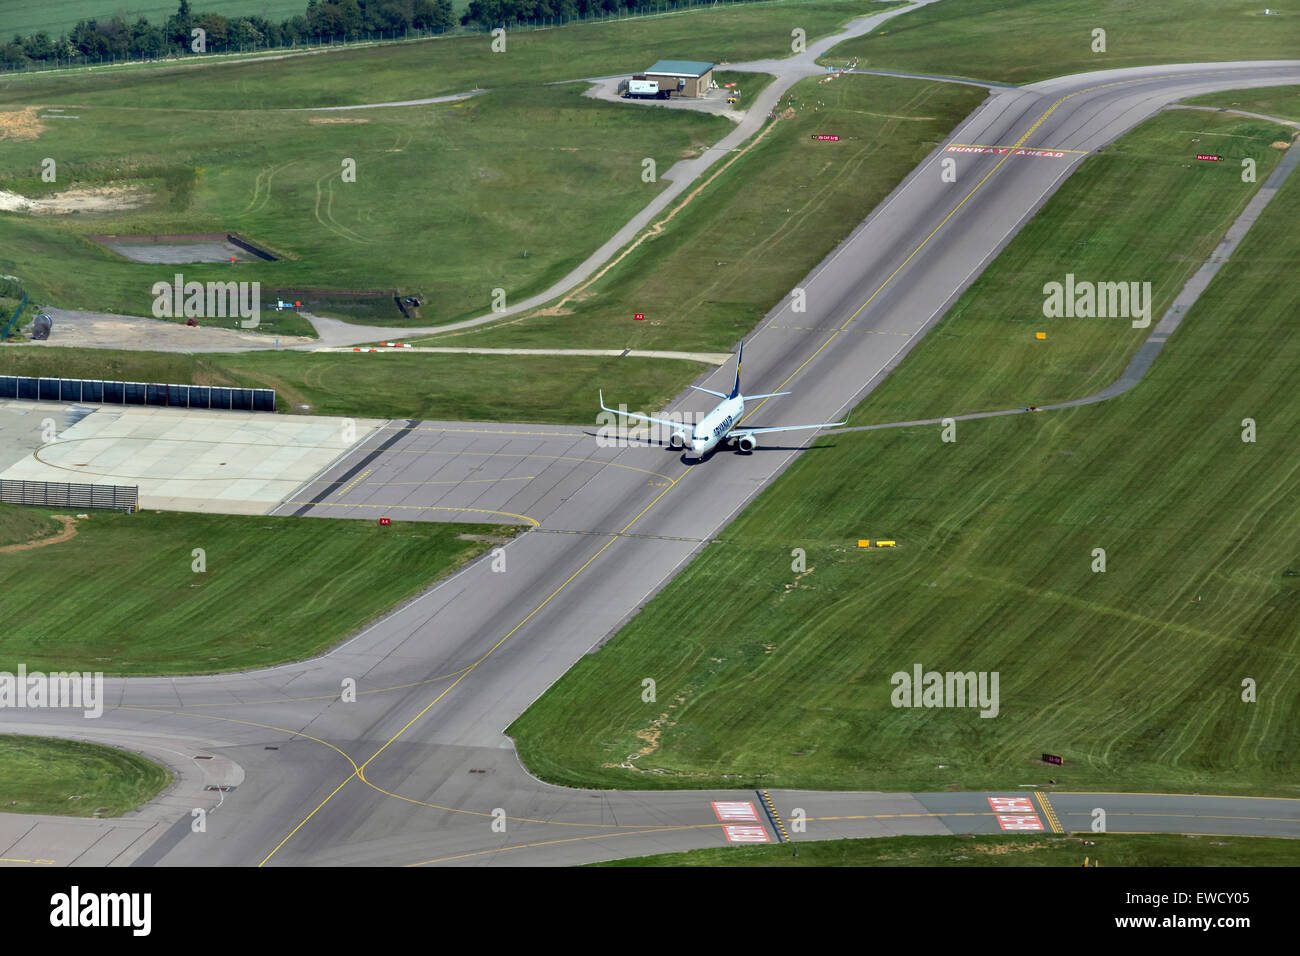 LUTON AIRPORT AIRFIELD, AERIAL VIEW OVERHEAD. A RYANAIR JET TAXIING AFTER LANDING AT LUTON AIRPORT Stock Photo